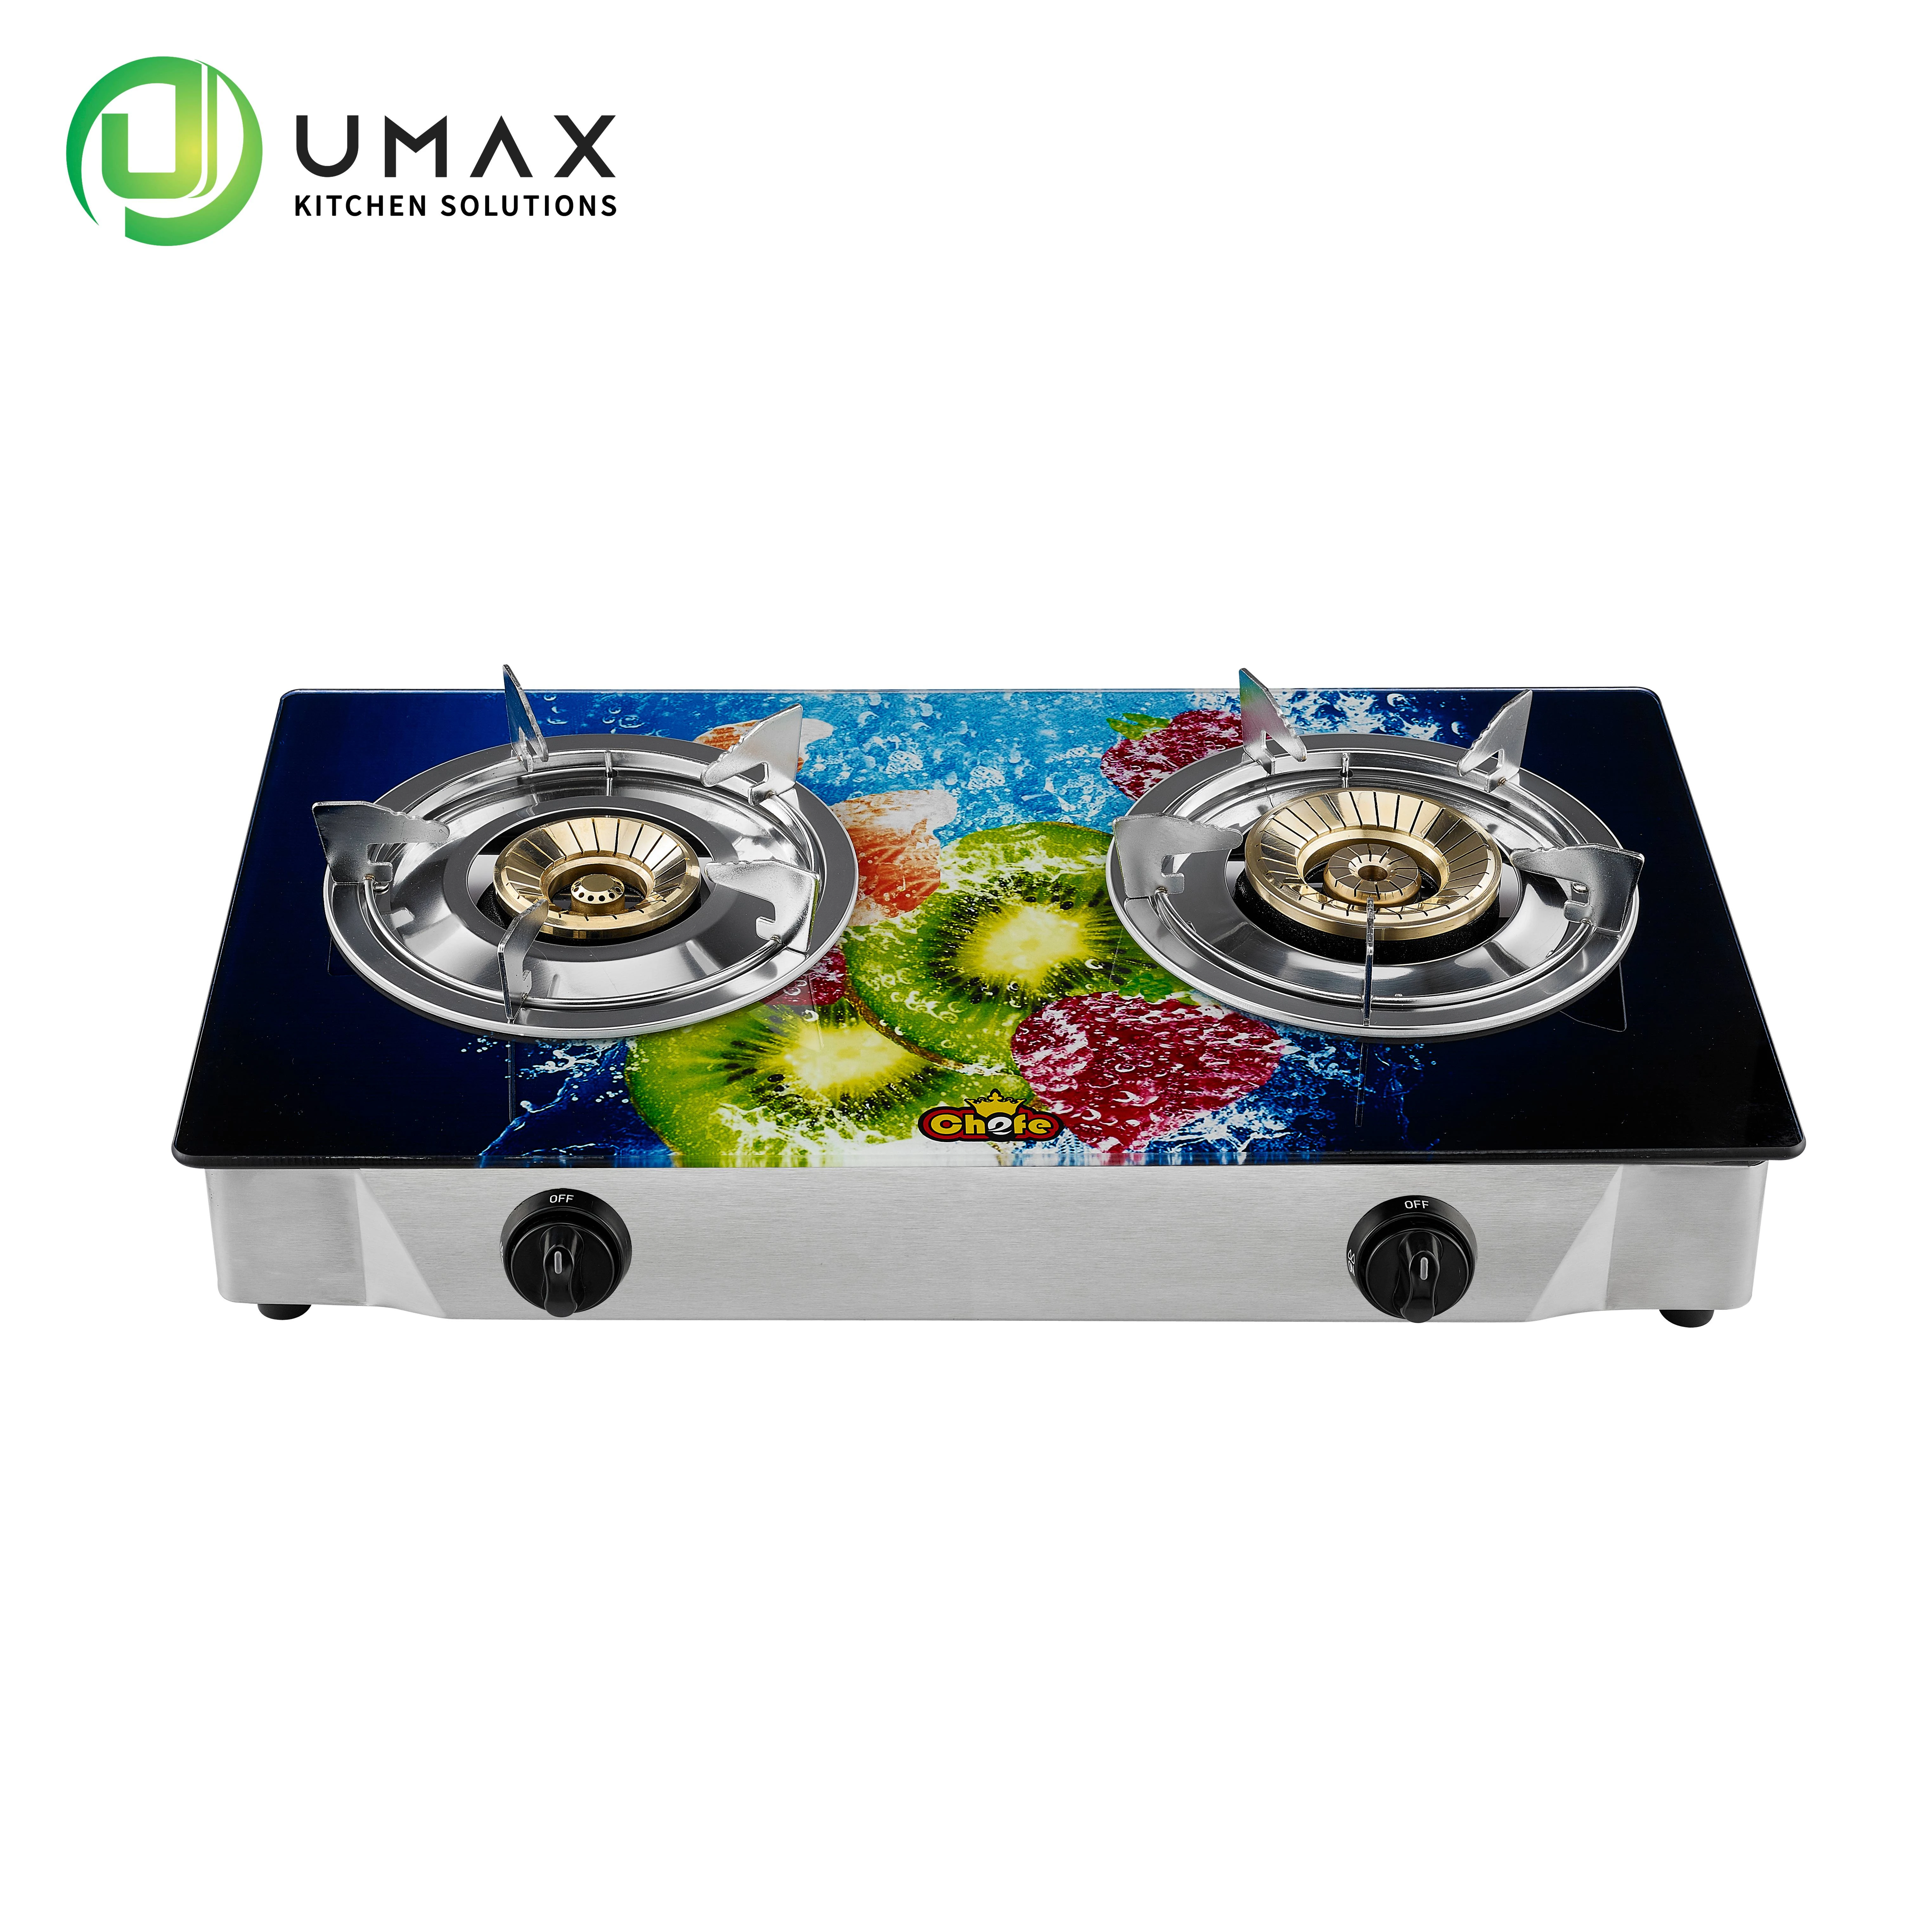 China best price Umax strong grill gas cooker cast iron burner table gas stove cooker